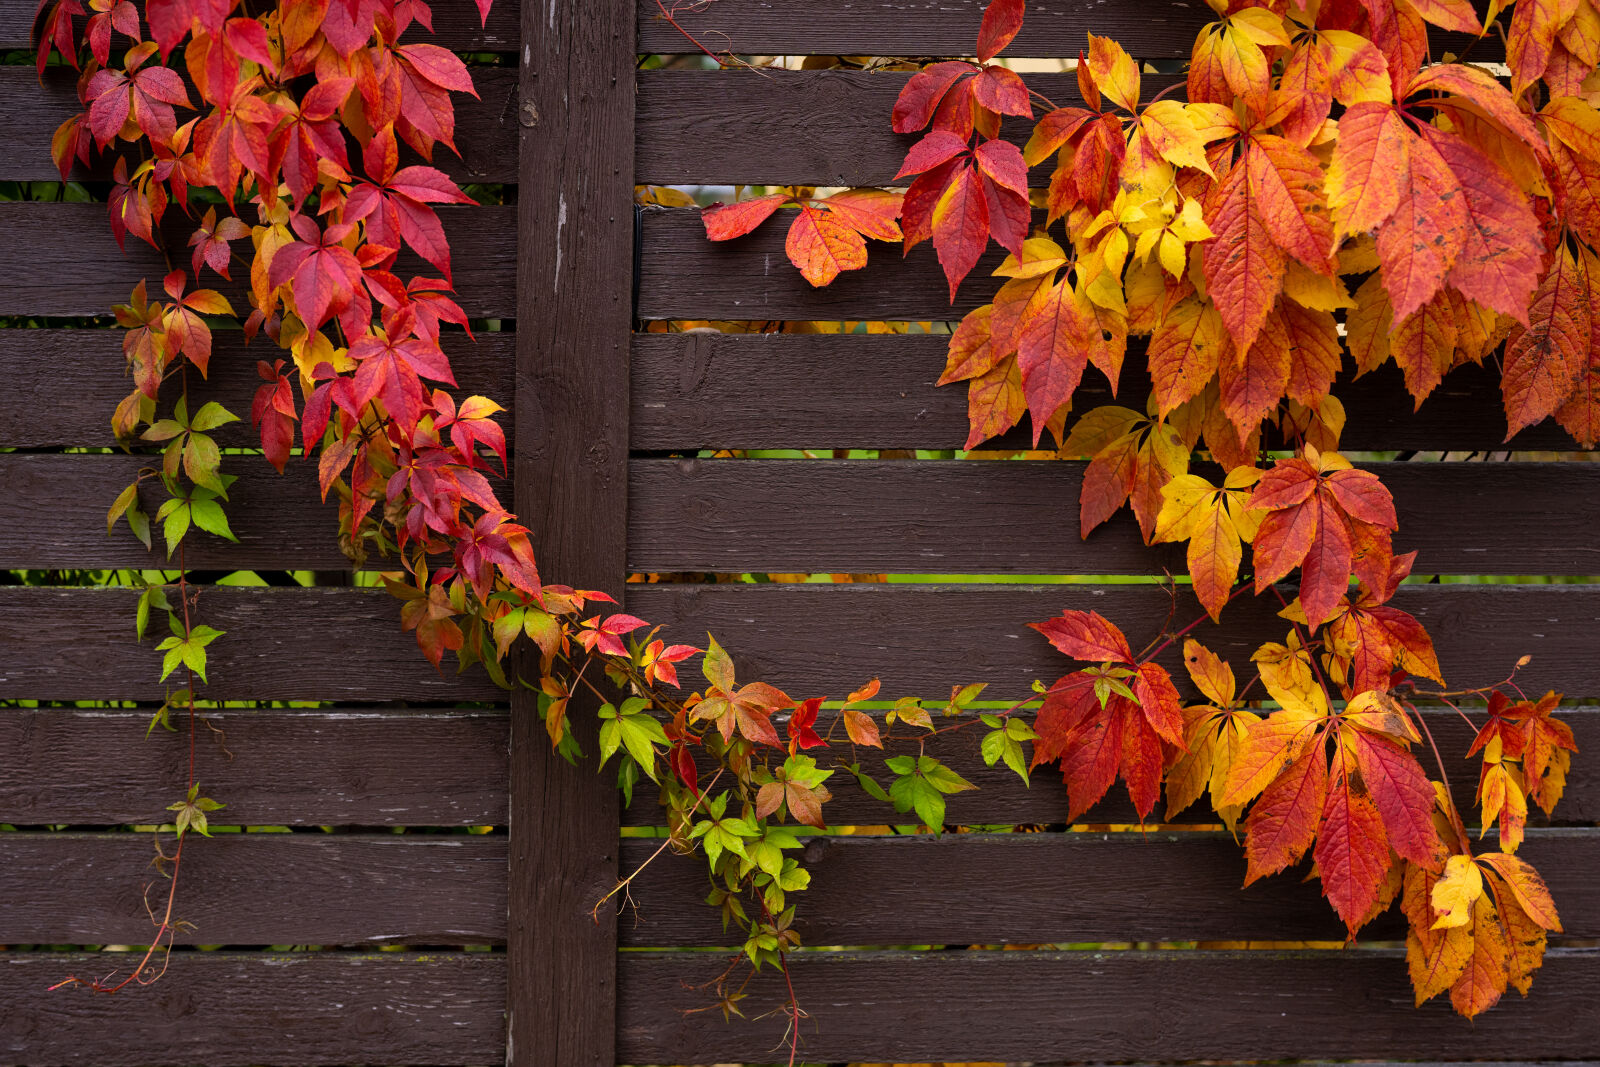 Nikon Z7 II sample photo. Autumn fence after the photography